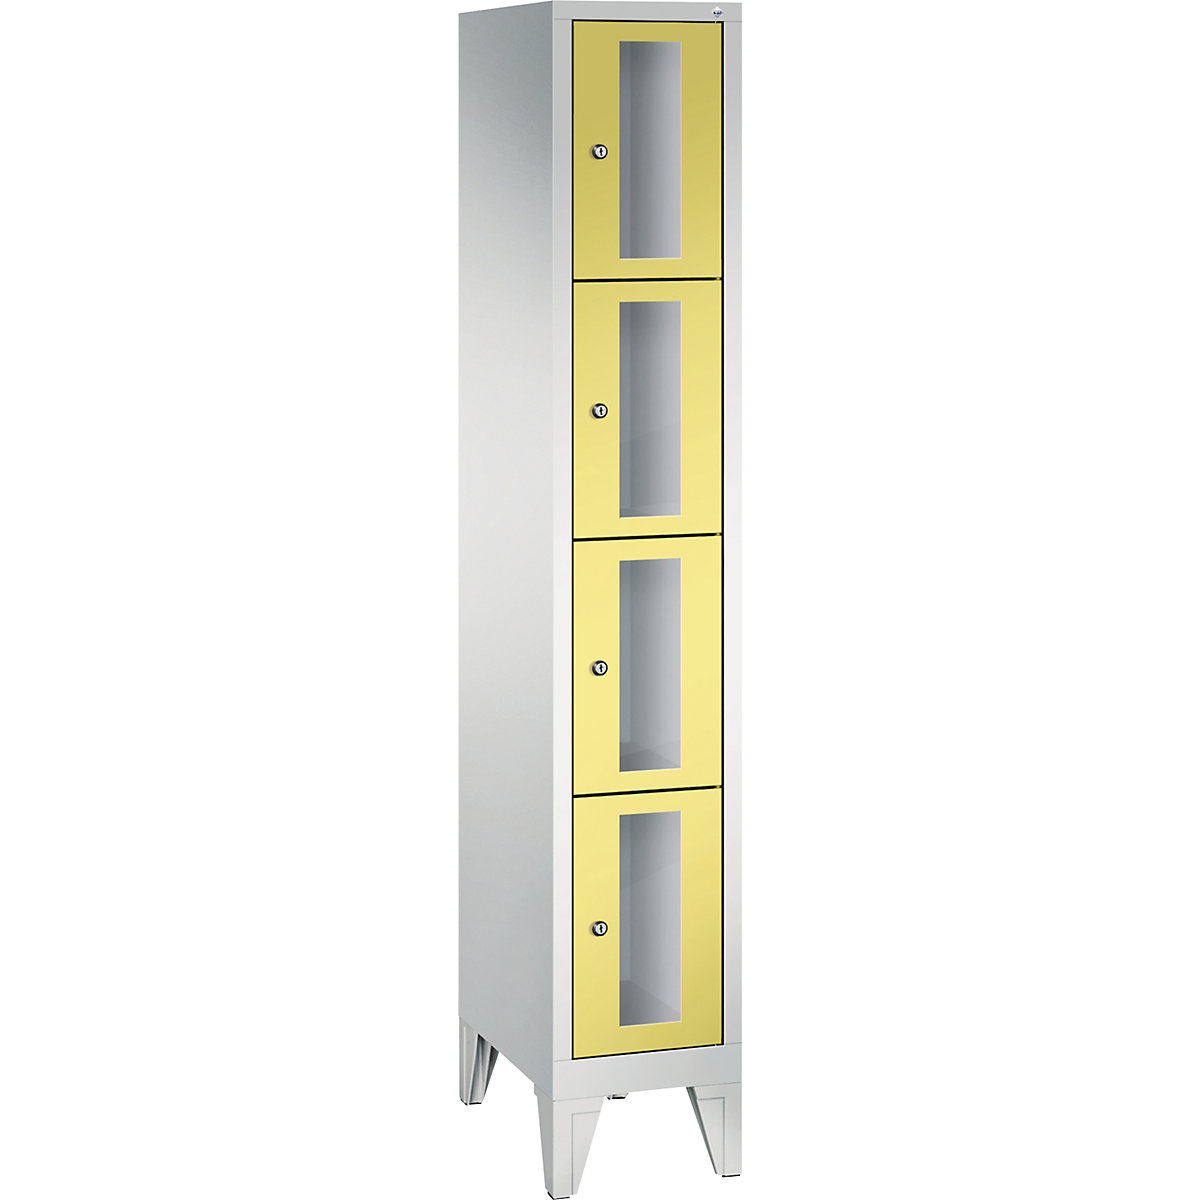 CLASSIC locker unit, compartment height 375 mm, with feet – C+P, 4 compartments, width 320 mm, sulphur yellow door